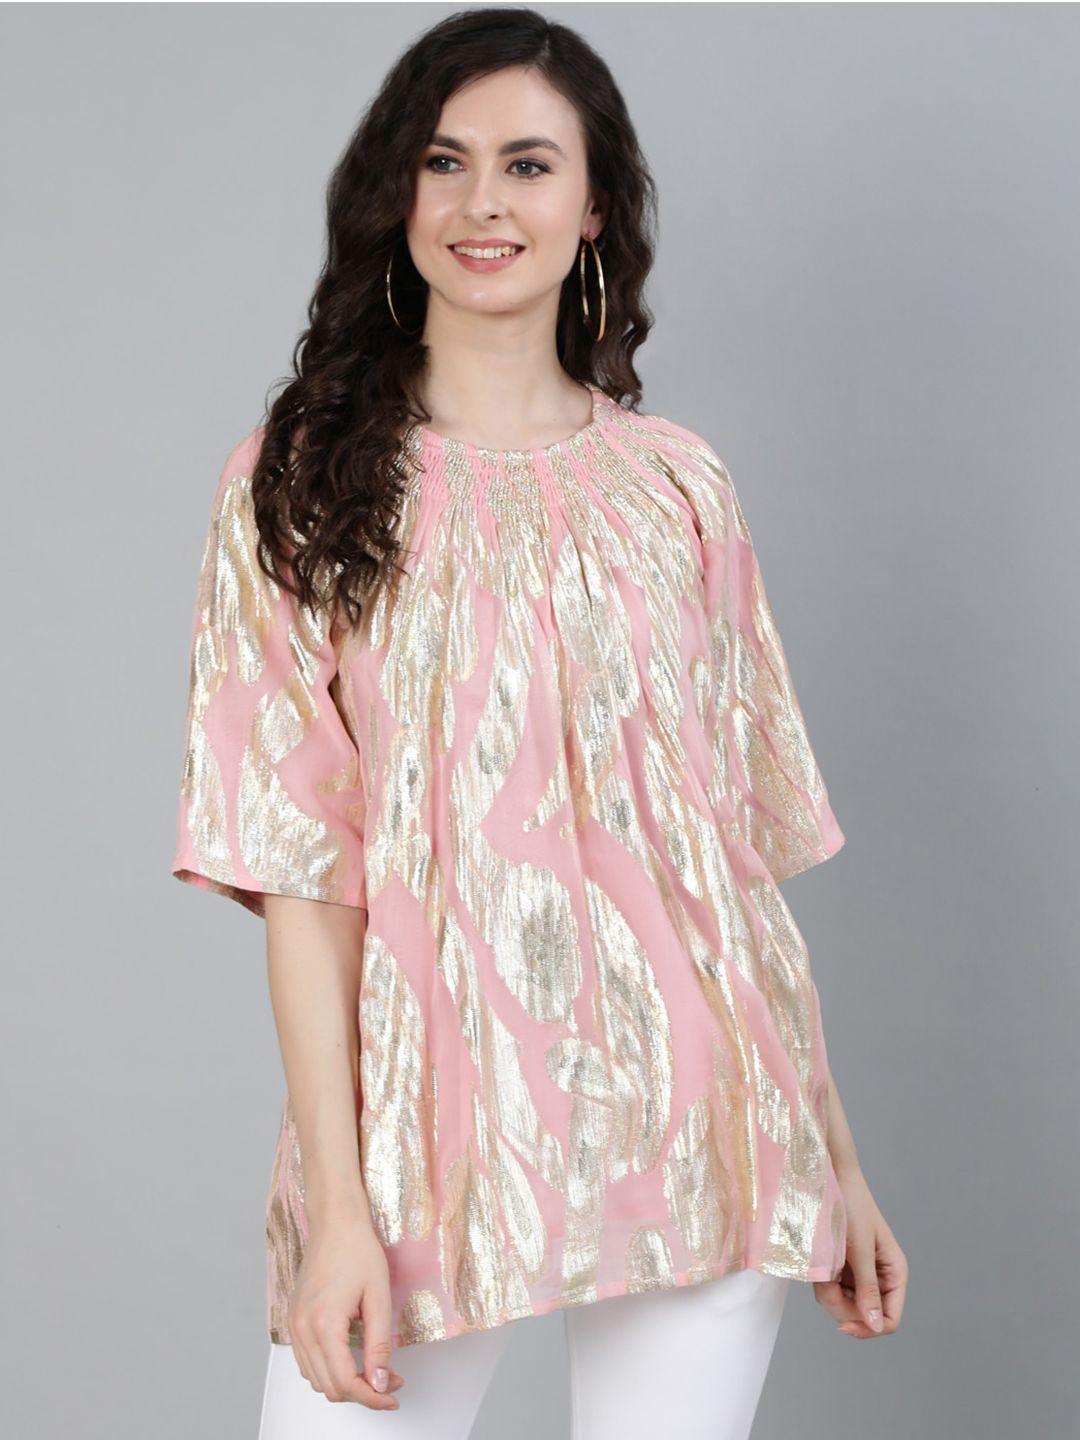 ishin-pink-&-gold-toned-extended-sleeves-crepe-a-line-top